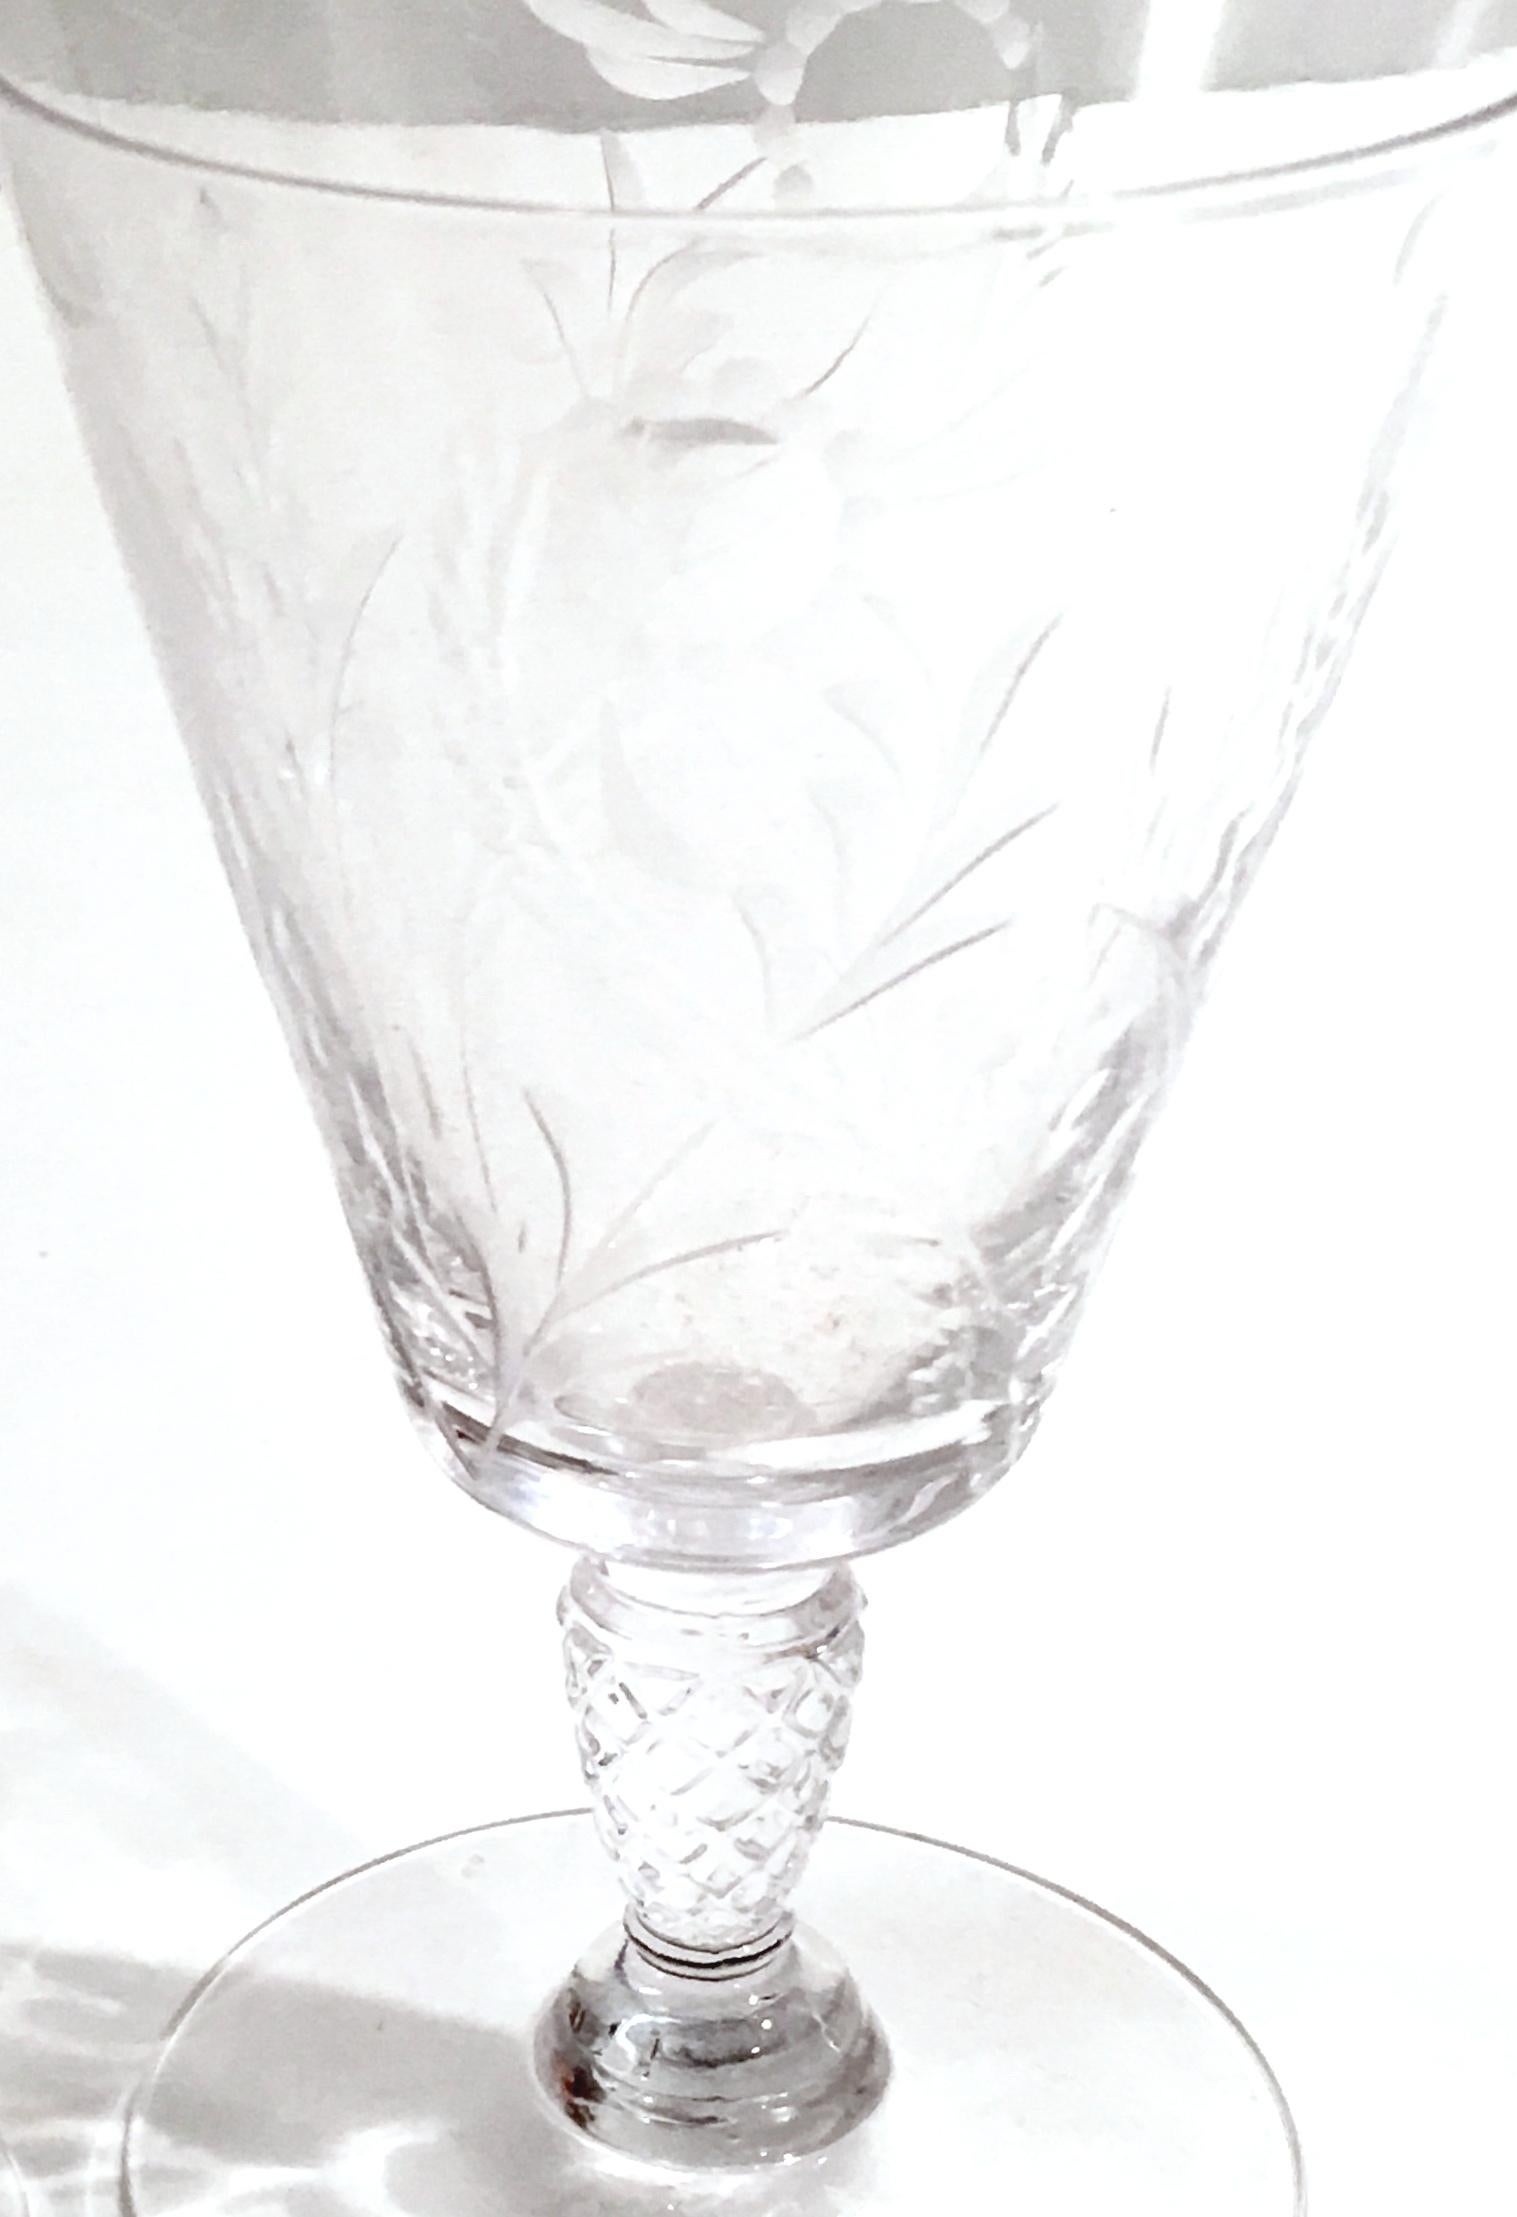 Mid-20th Century American Cut and Etched Crystal Stem Glasses S/8 For Sale 6